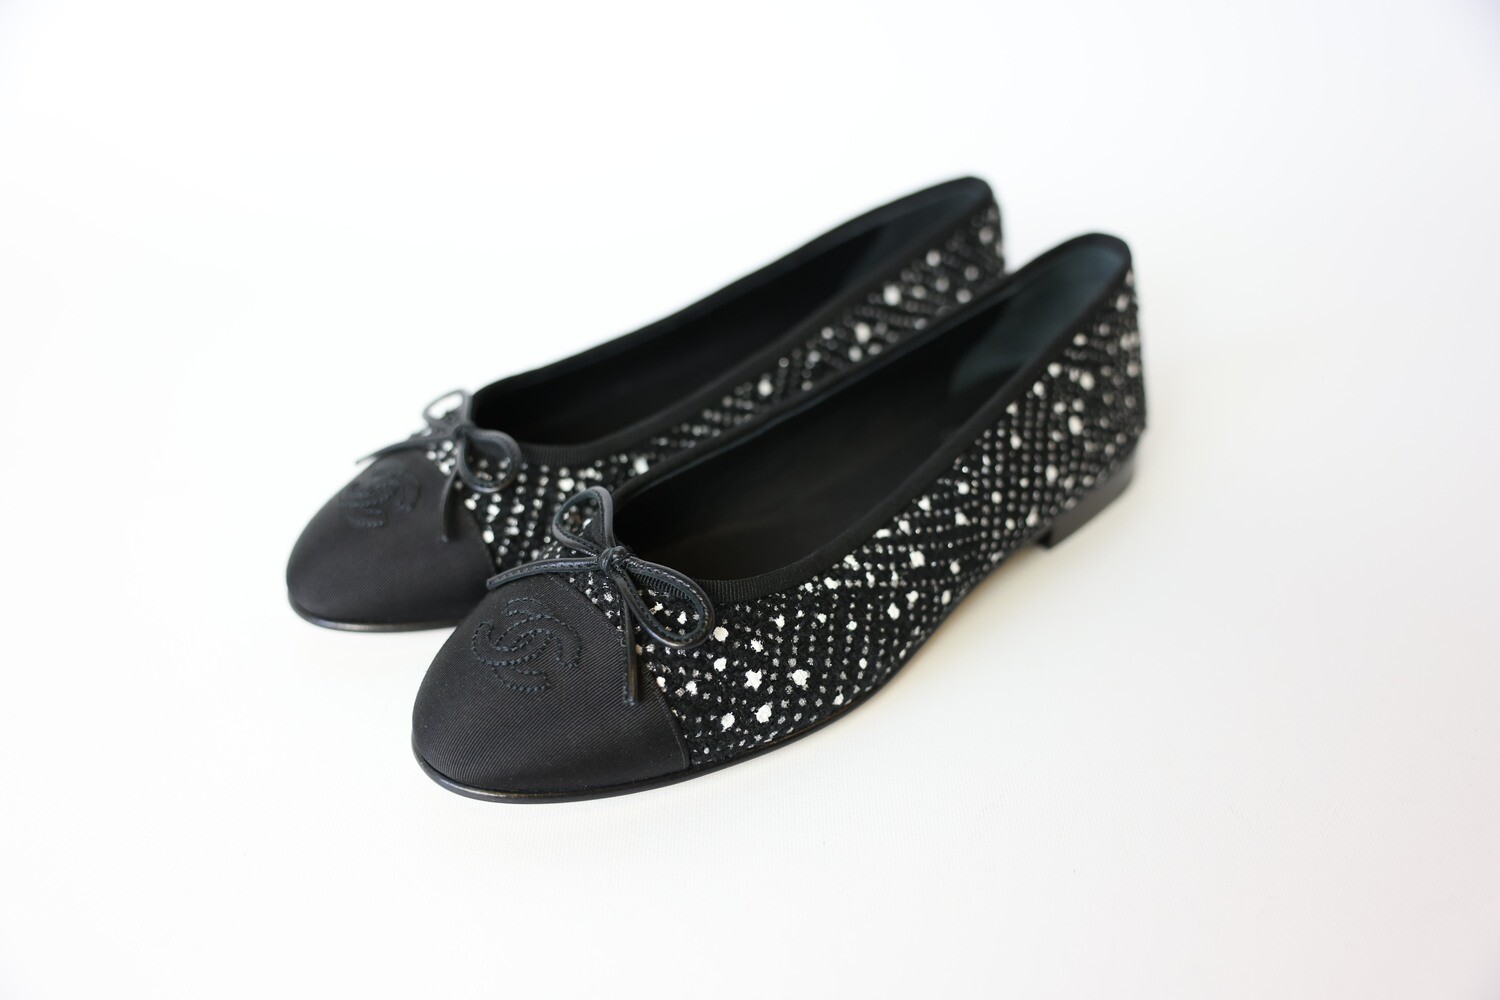 Chanel Ballet Flats, Black and White Tweed, Size 38.5, New in Box WA001